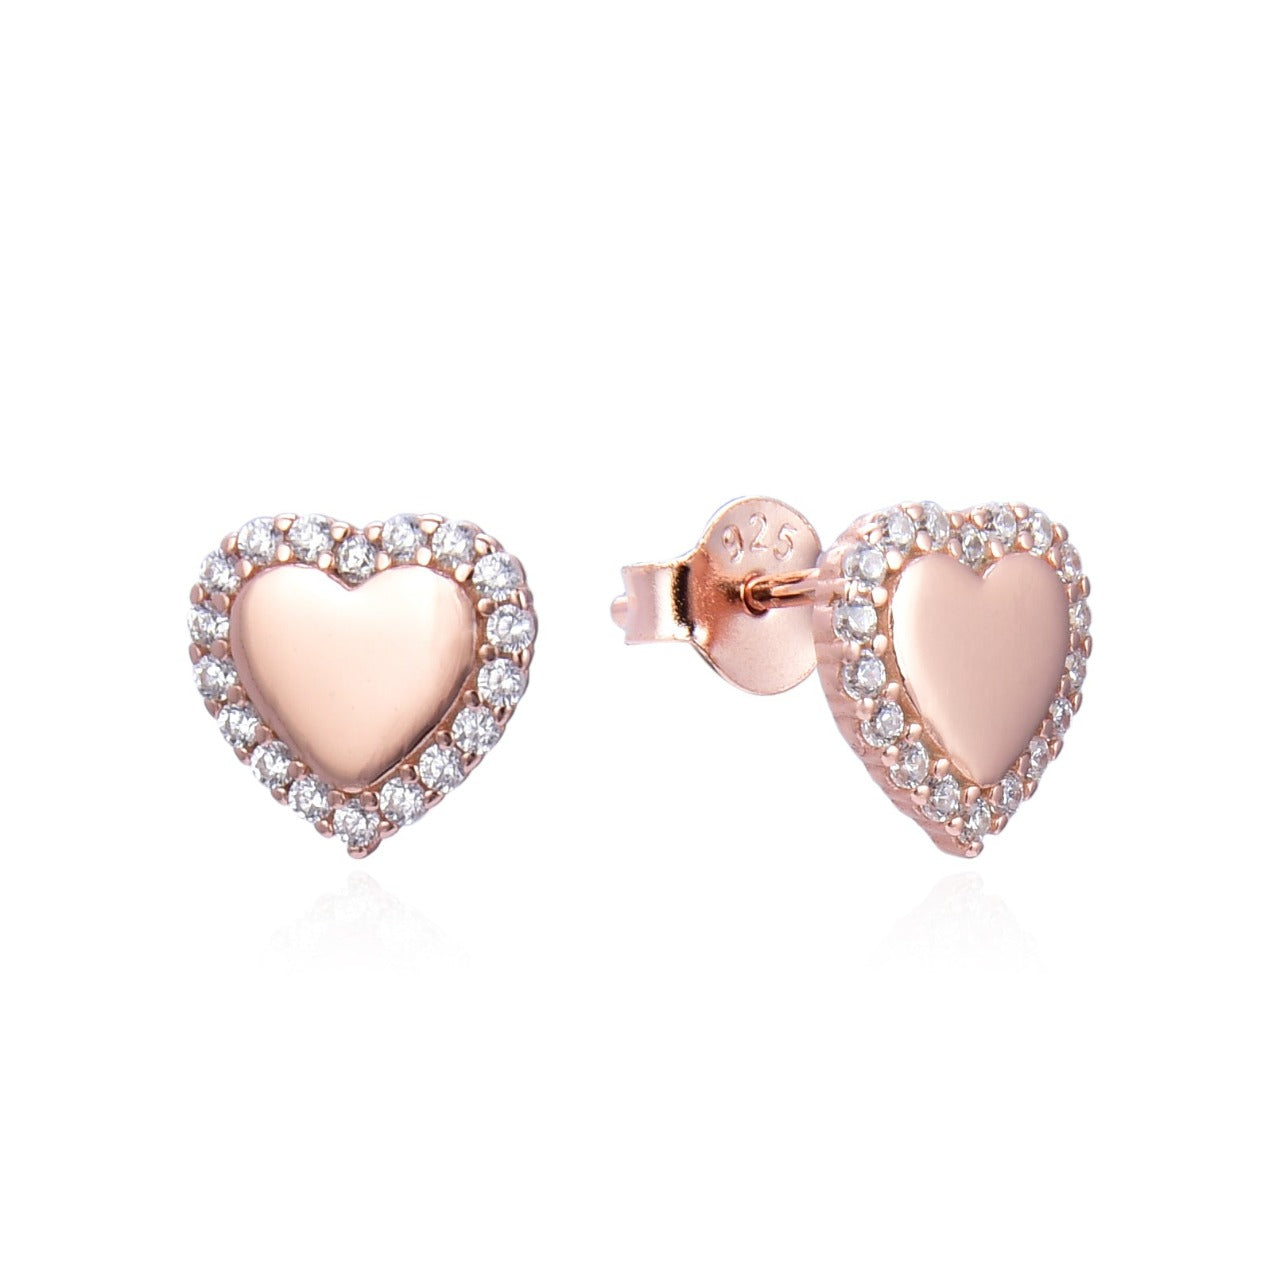 Kilkenny Silver Rose Gold Glistening Heart Stud Earrings  Rose gold plated sterling silver heart stud earrings with a cubic zirconia outline.